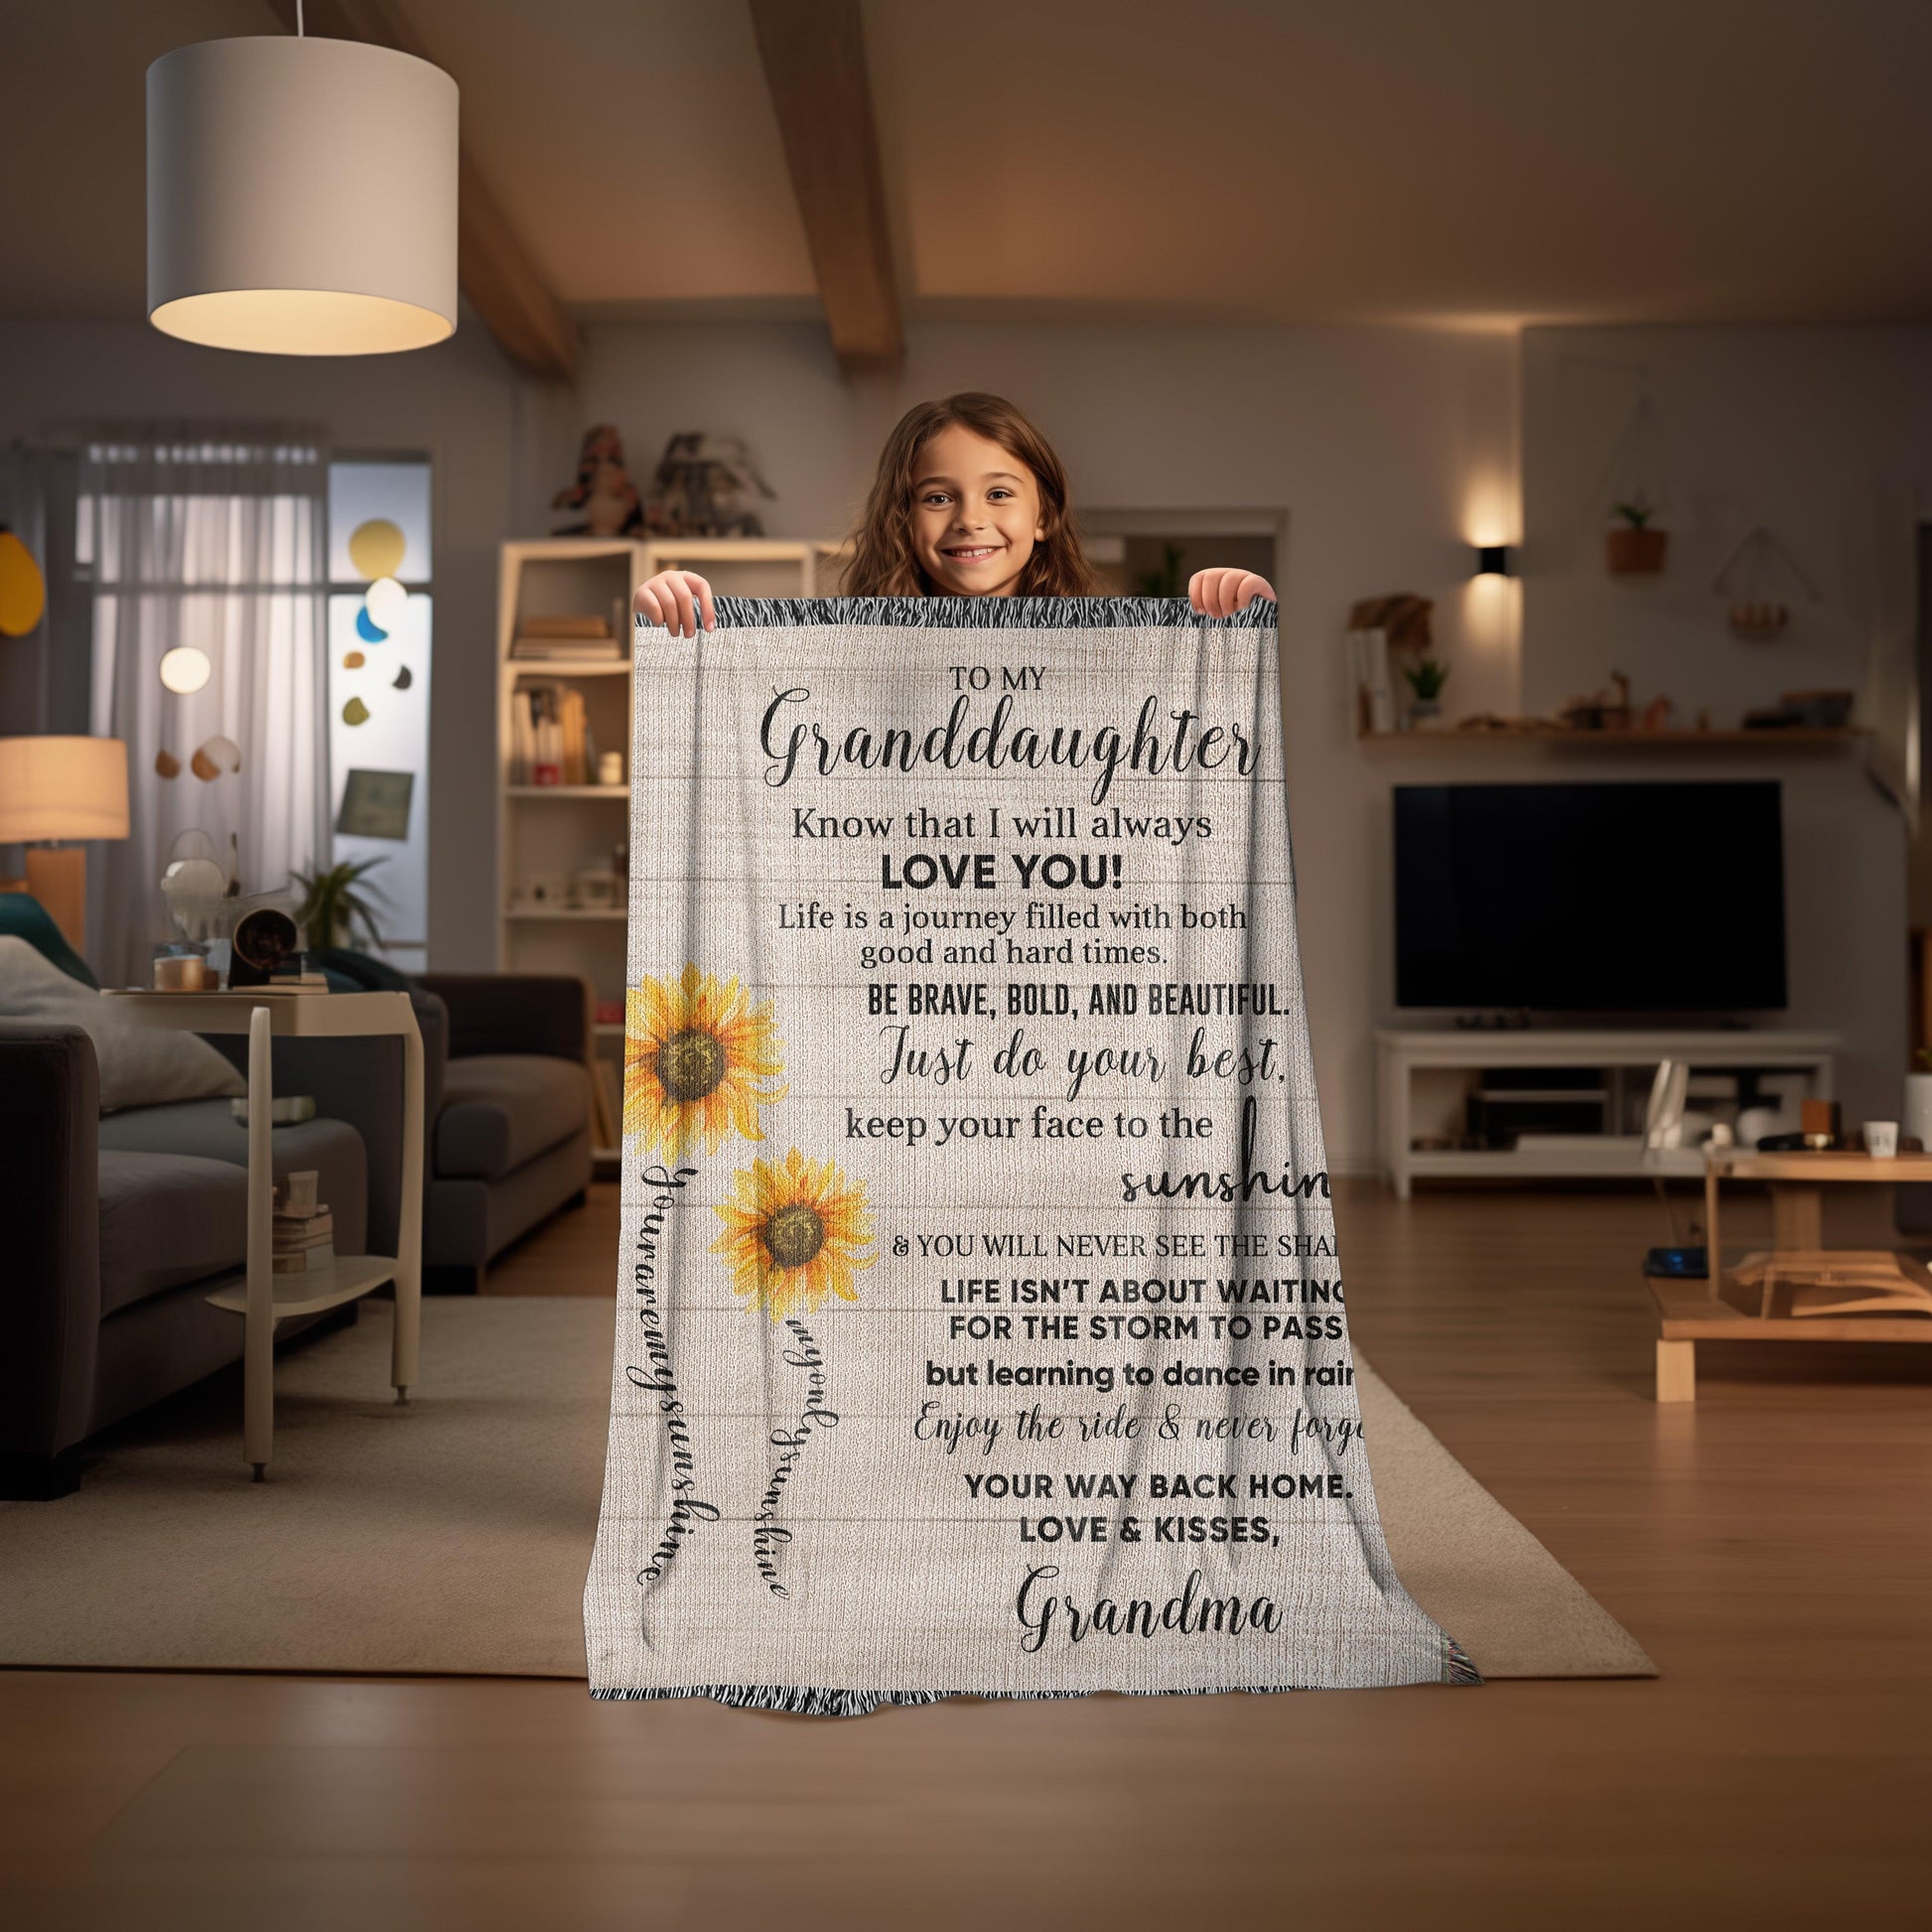 Granddaughter Keepsake Gift - Know that I Will Always Love You - Personalized Heirloom Woven Cotton Blanket - Mallard Moon Gift Shop